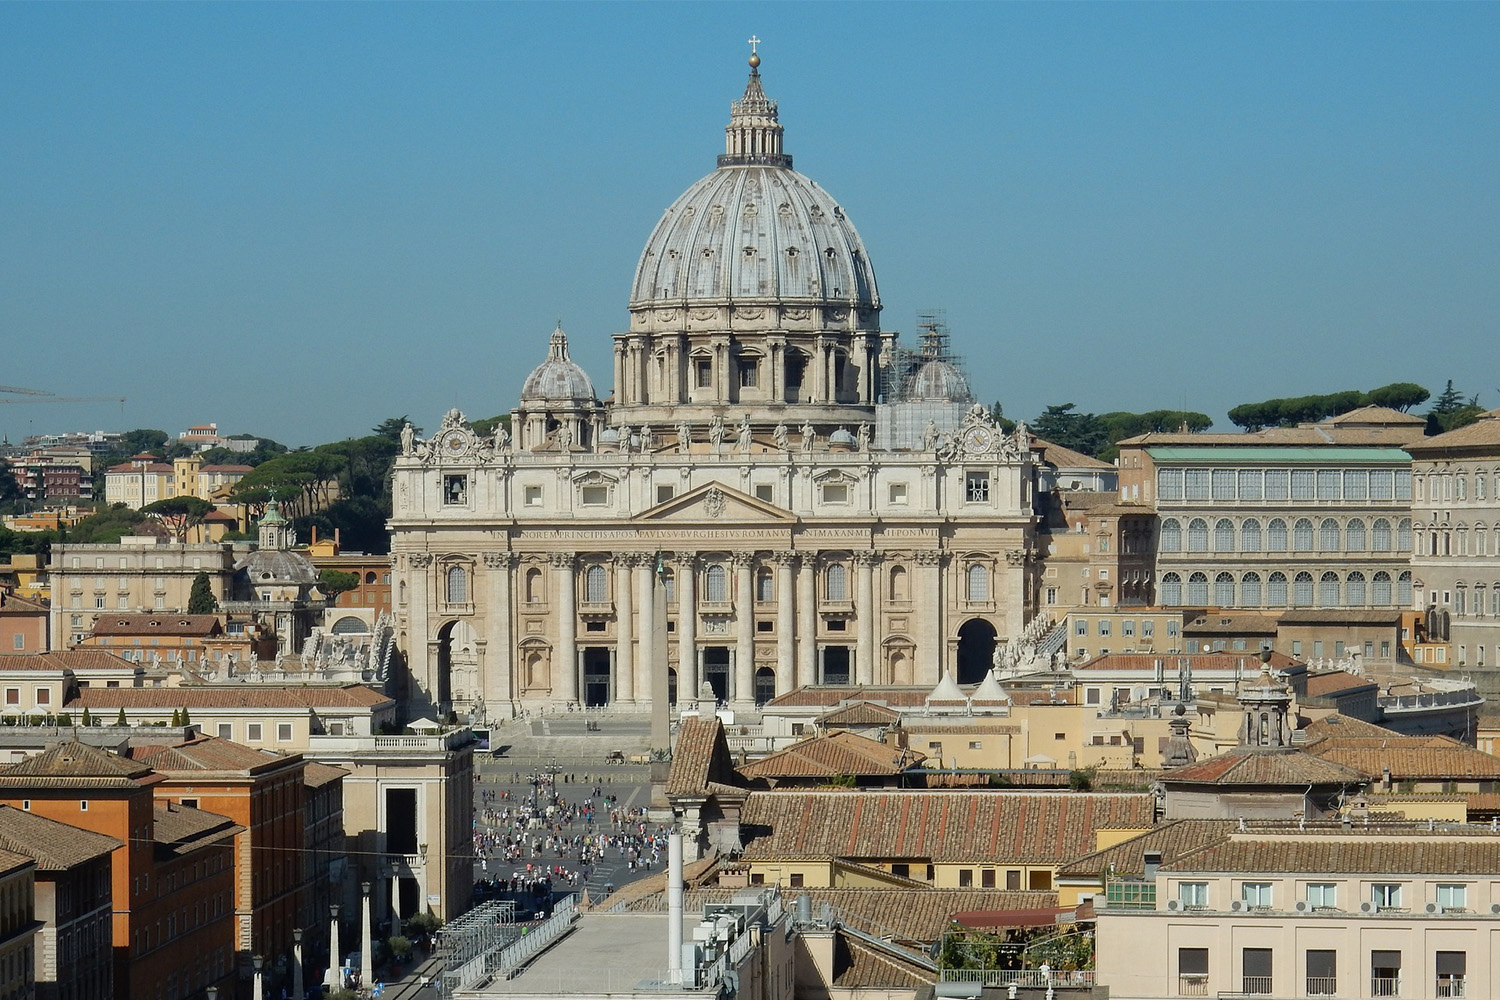 aerial view of St. Peter's cathedral in Rome